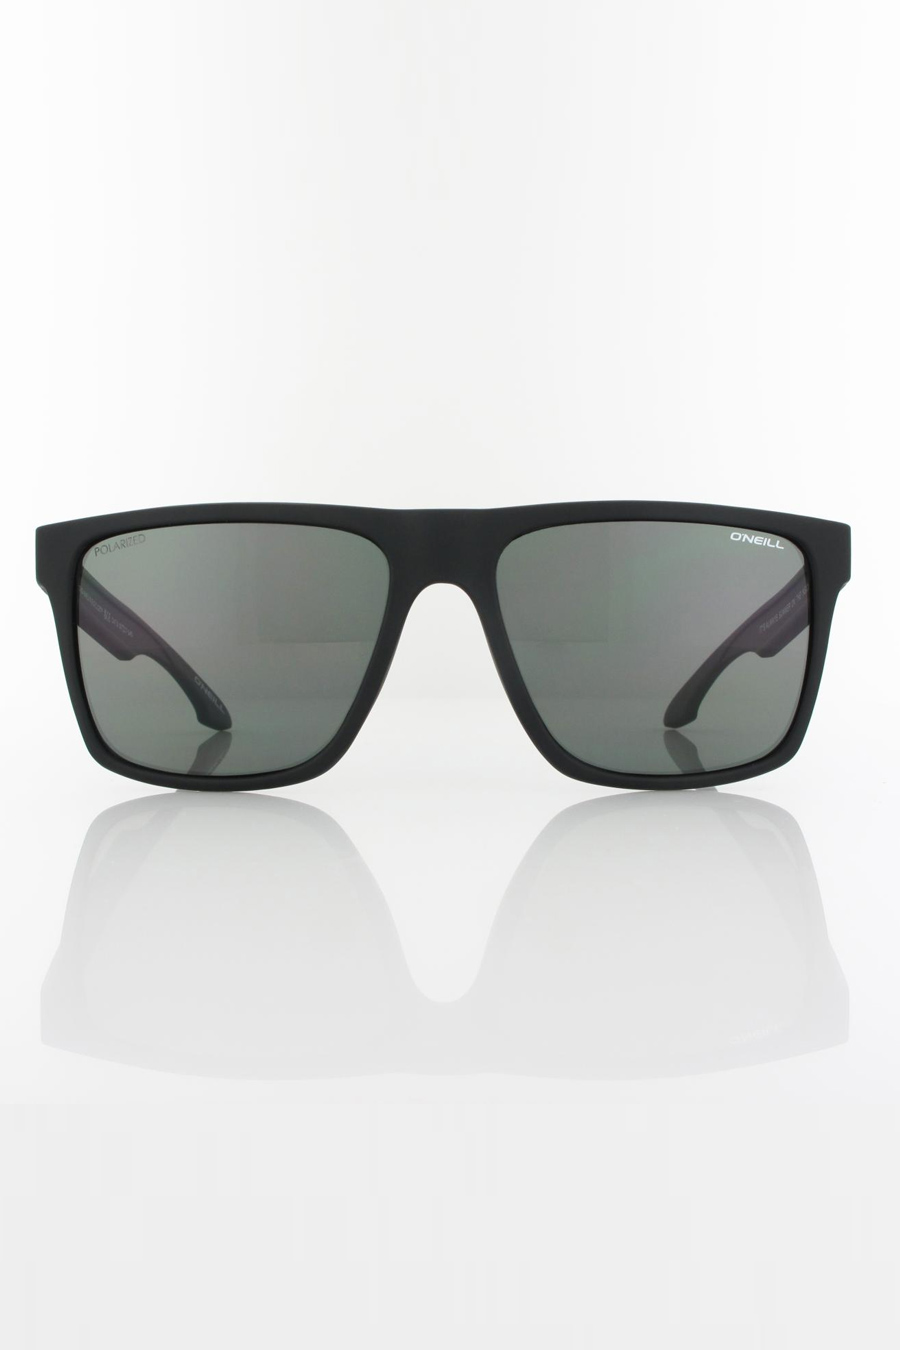 Sunglasses ONEILL ONS-HARLYN20-127P